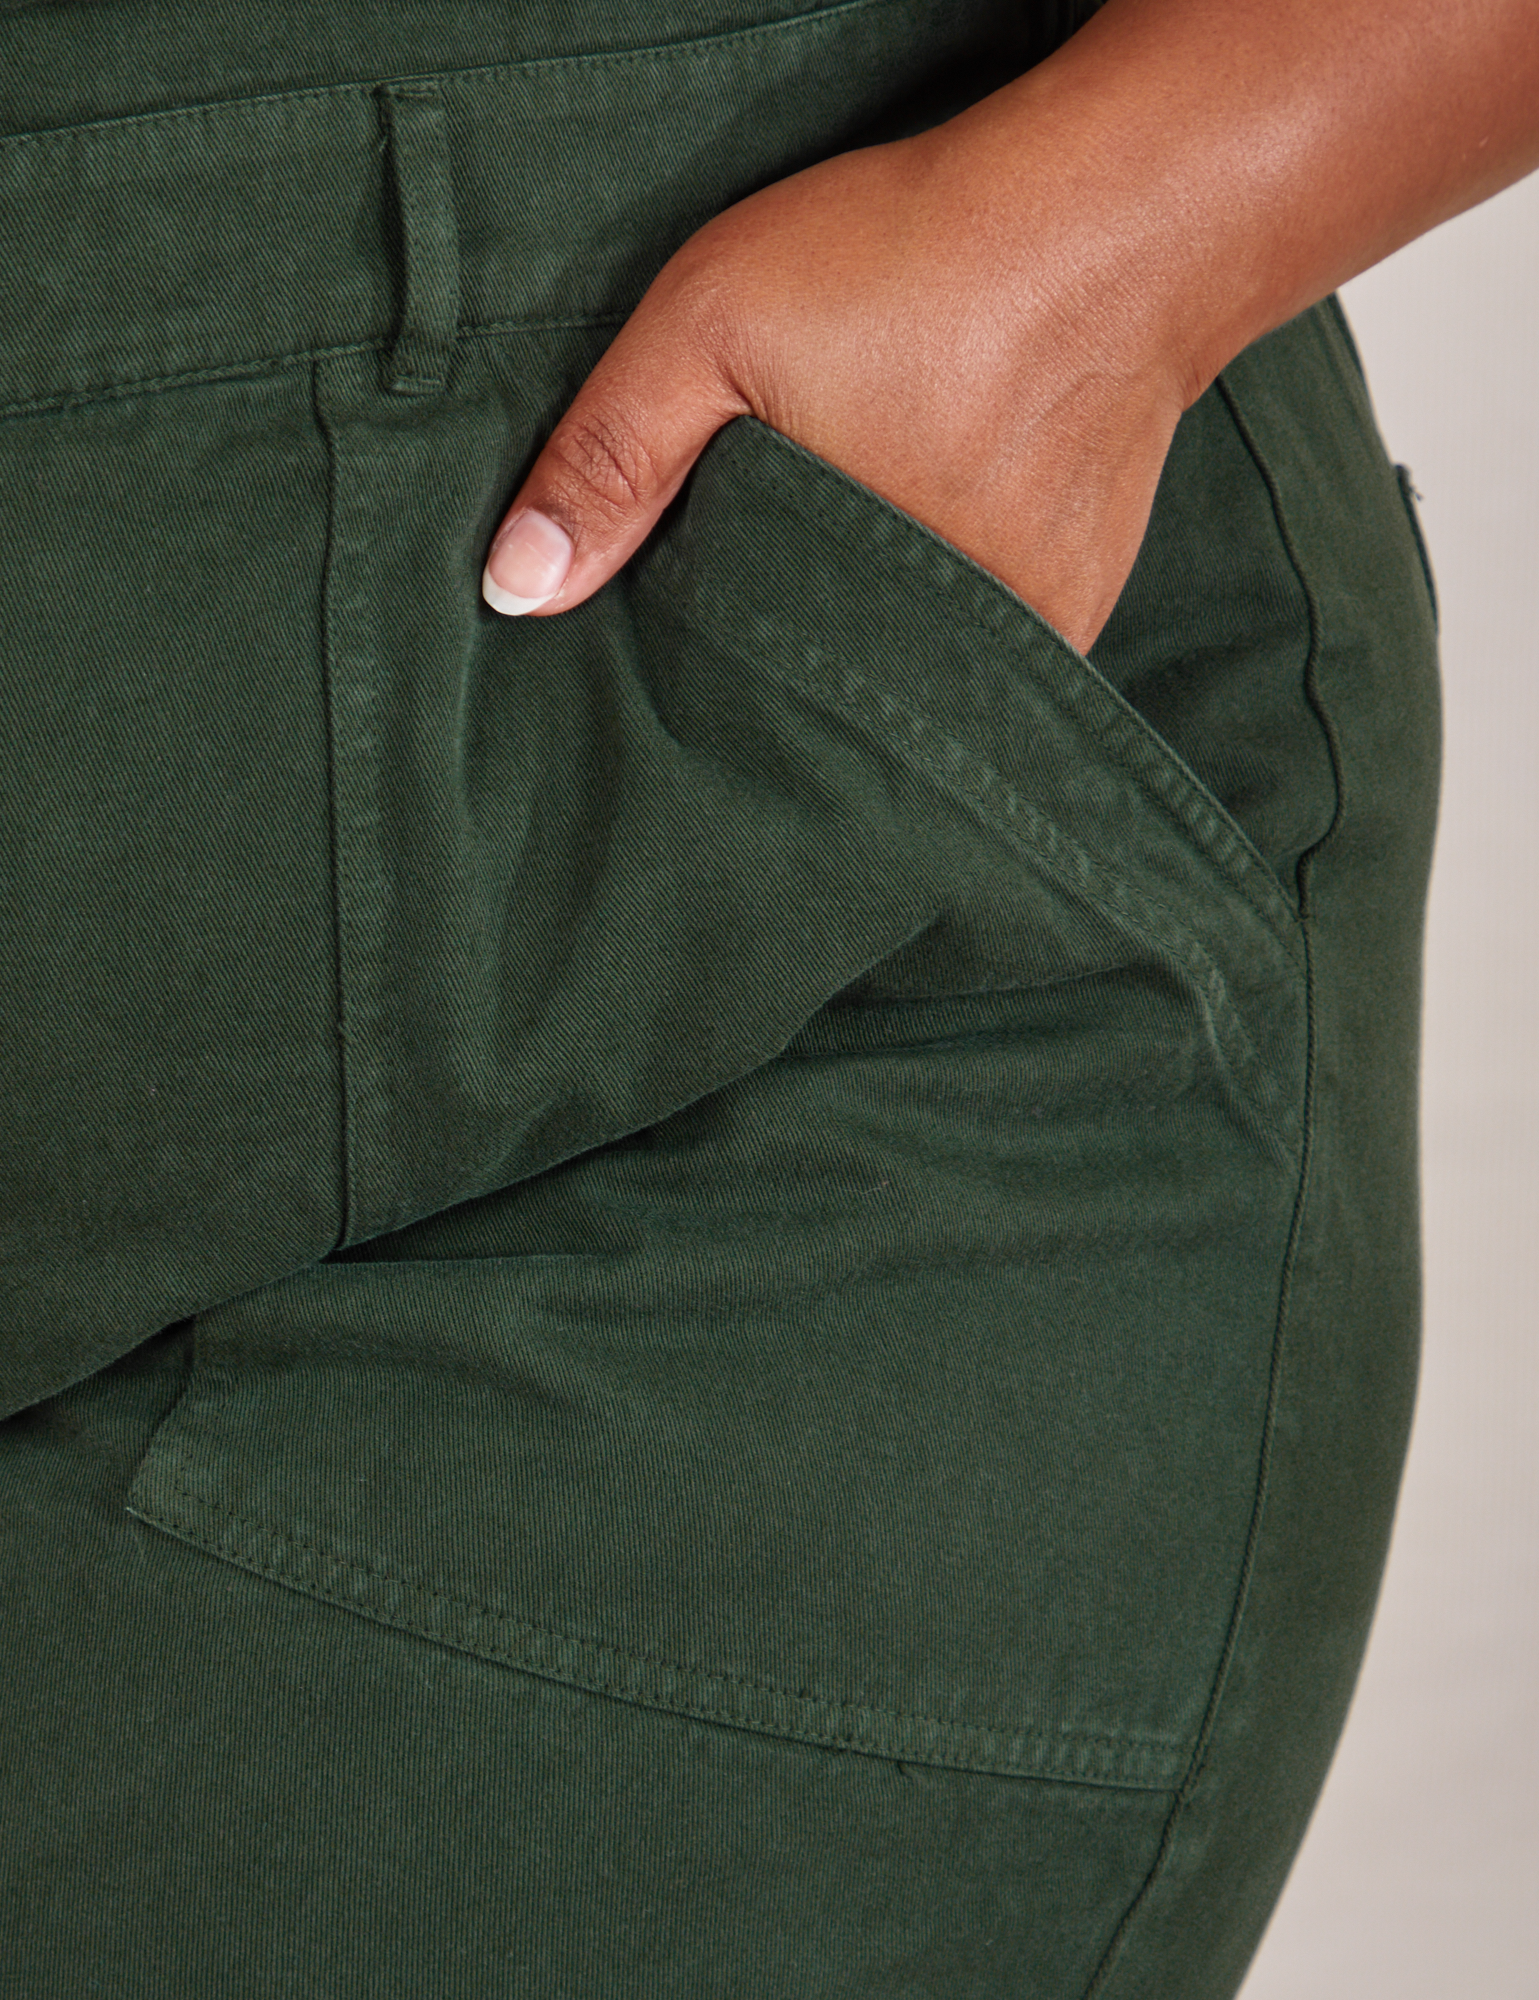 Short Sleeve Jumpsuit in Swamp Green front pocket close up. Morgan has her hand in the pocket.